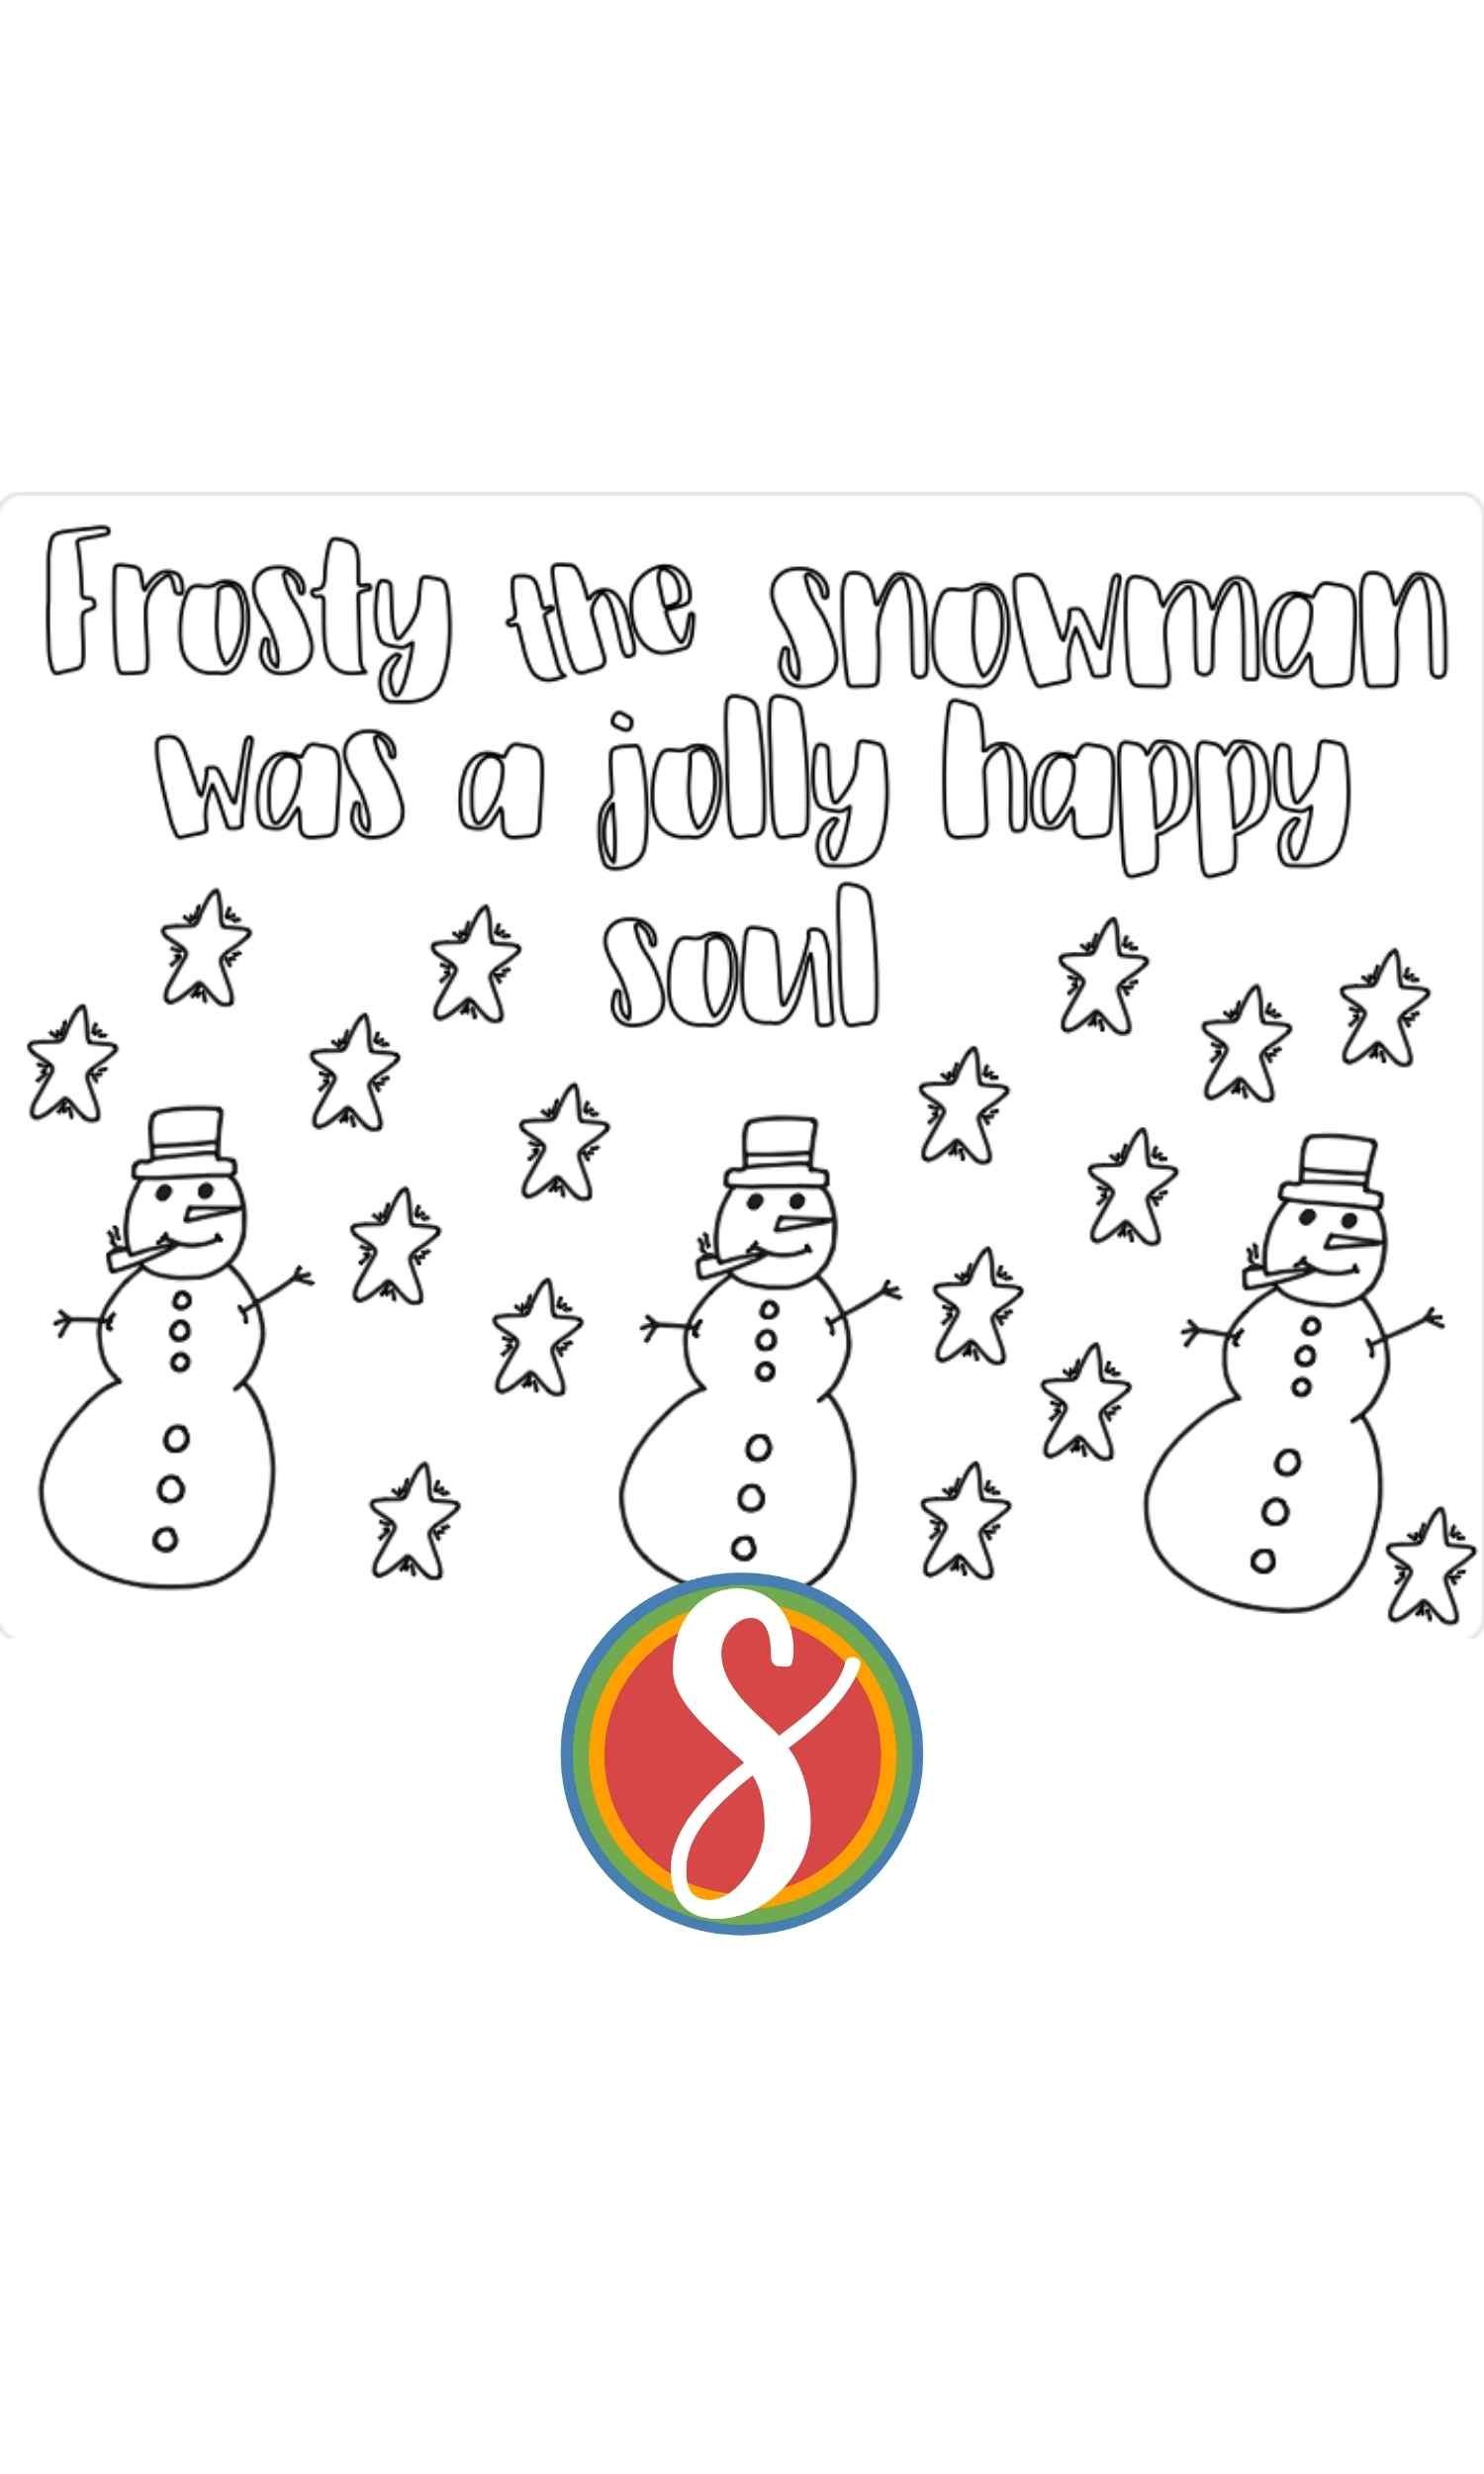 colorable text reads "frosty the snowman was a jolly happy soul" and the page has 3 colorable snowmen and many colorable stars